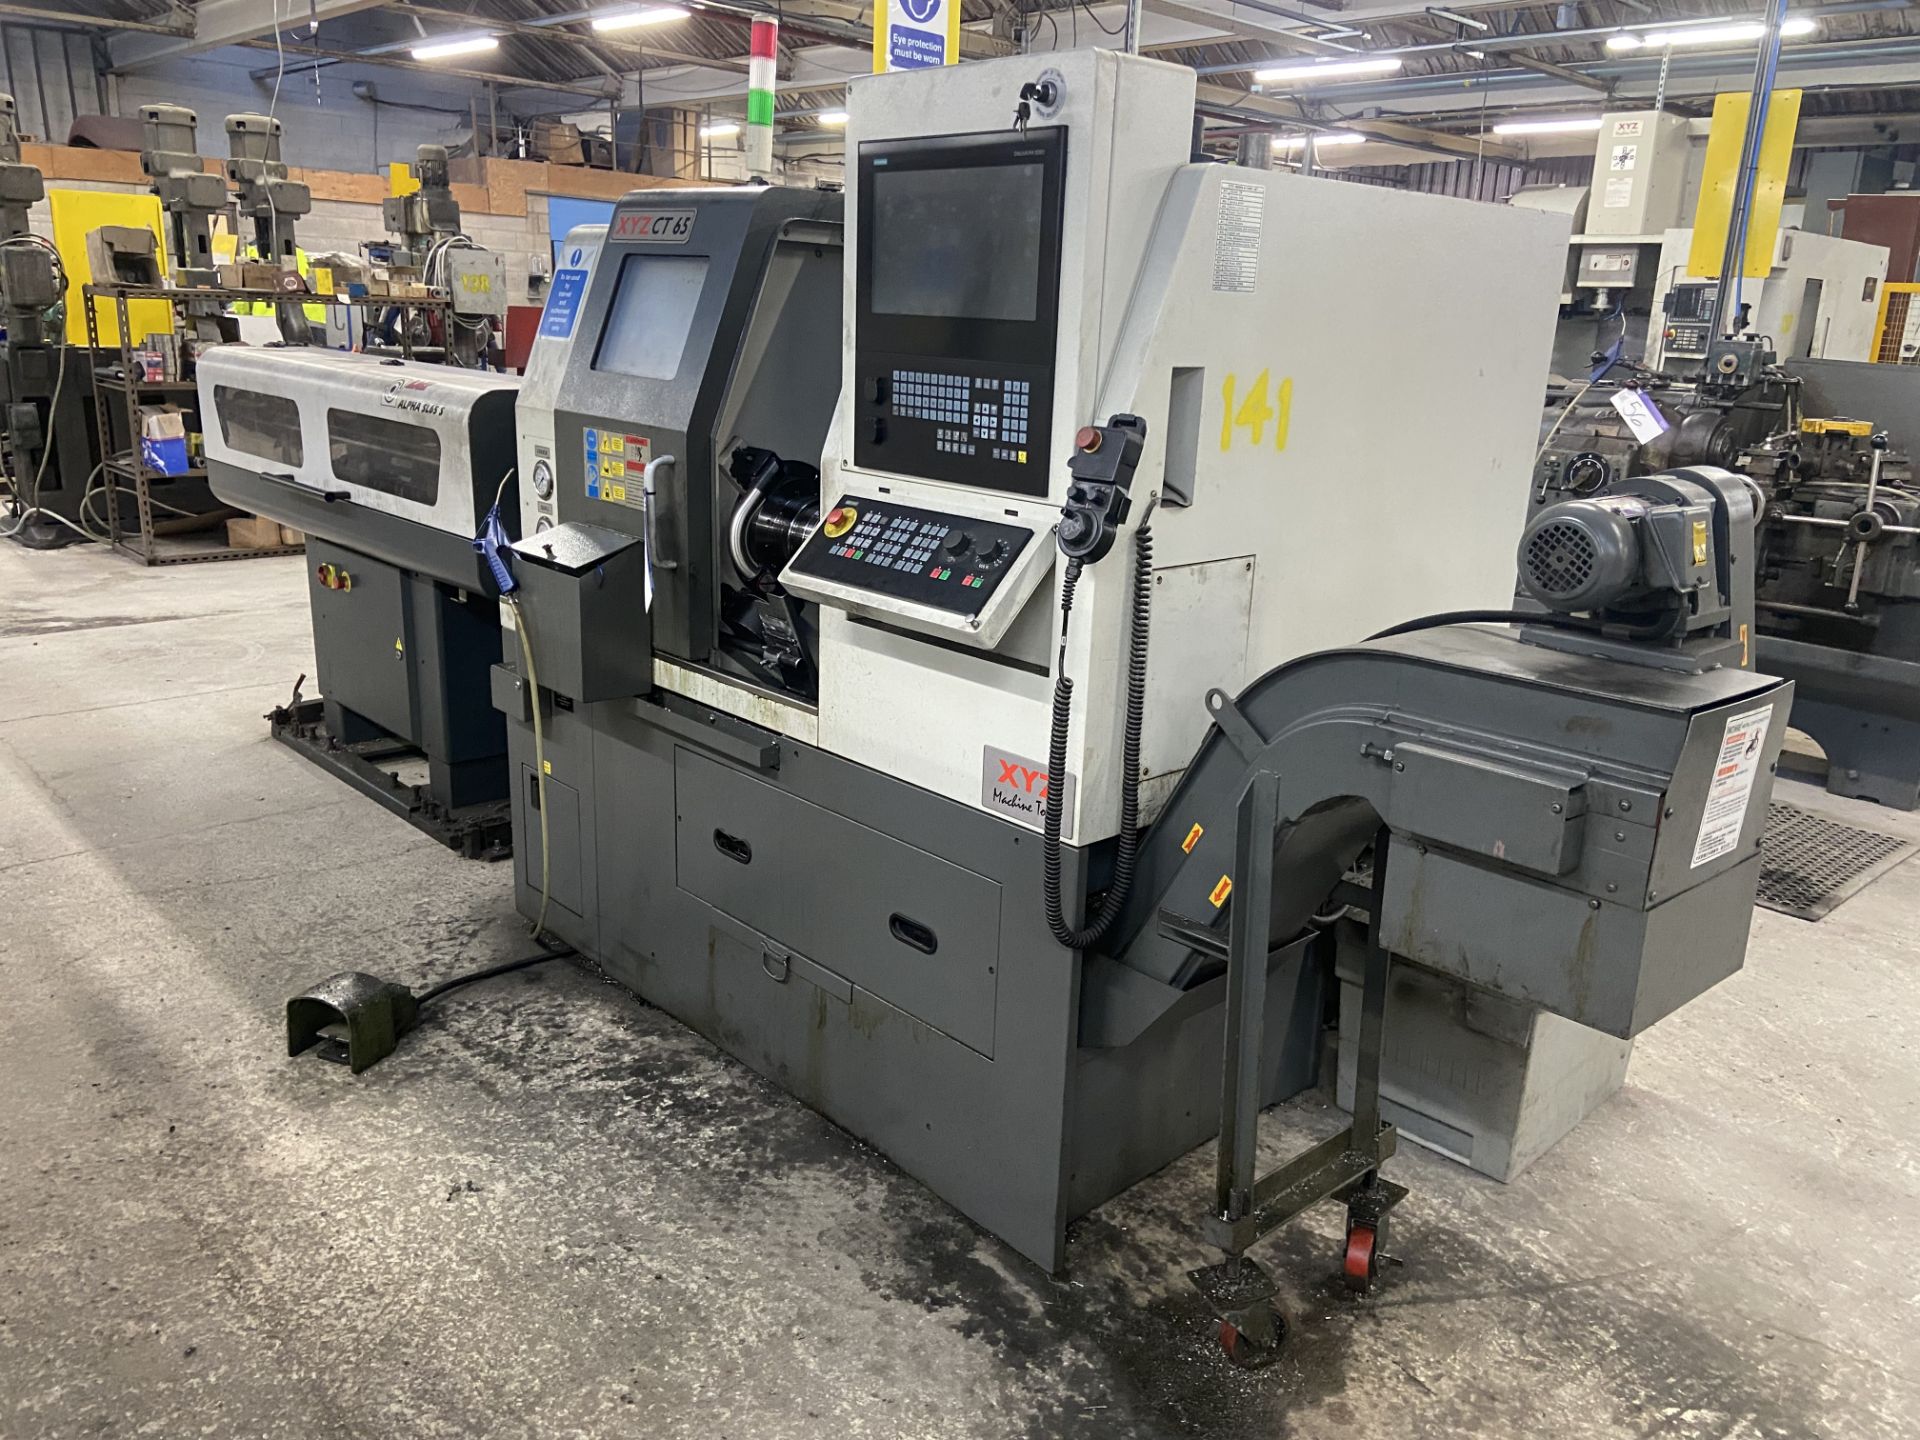 XYZ COMPACT TURN 65 BAR FEED CNC LATHE, serial no. STA20110, year of manufacture 2018, with LNS